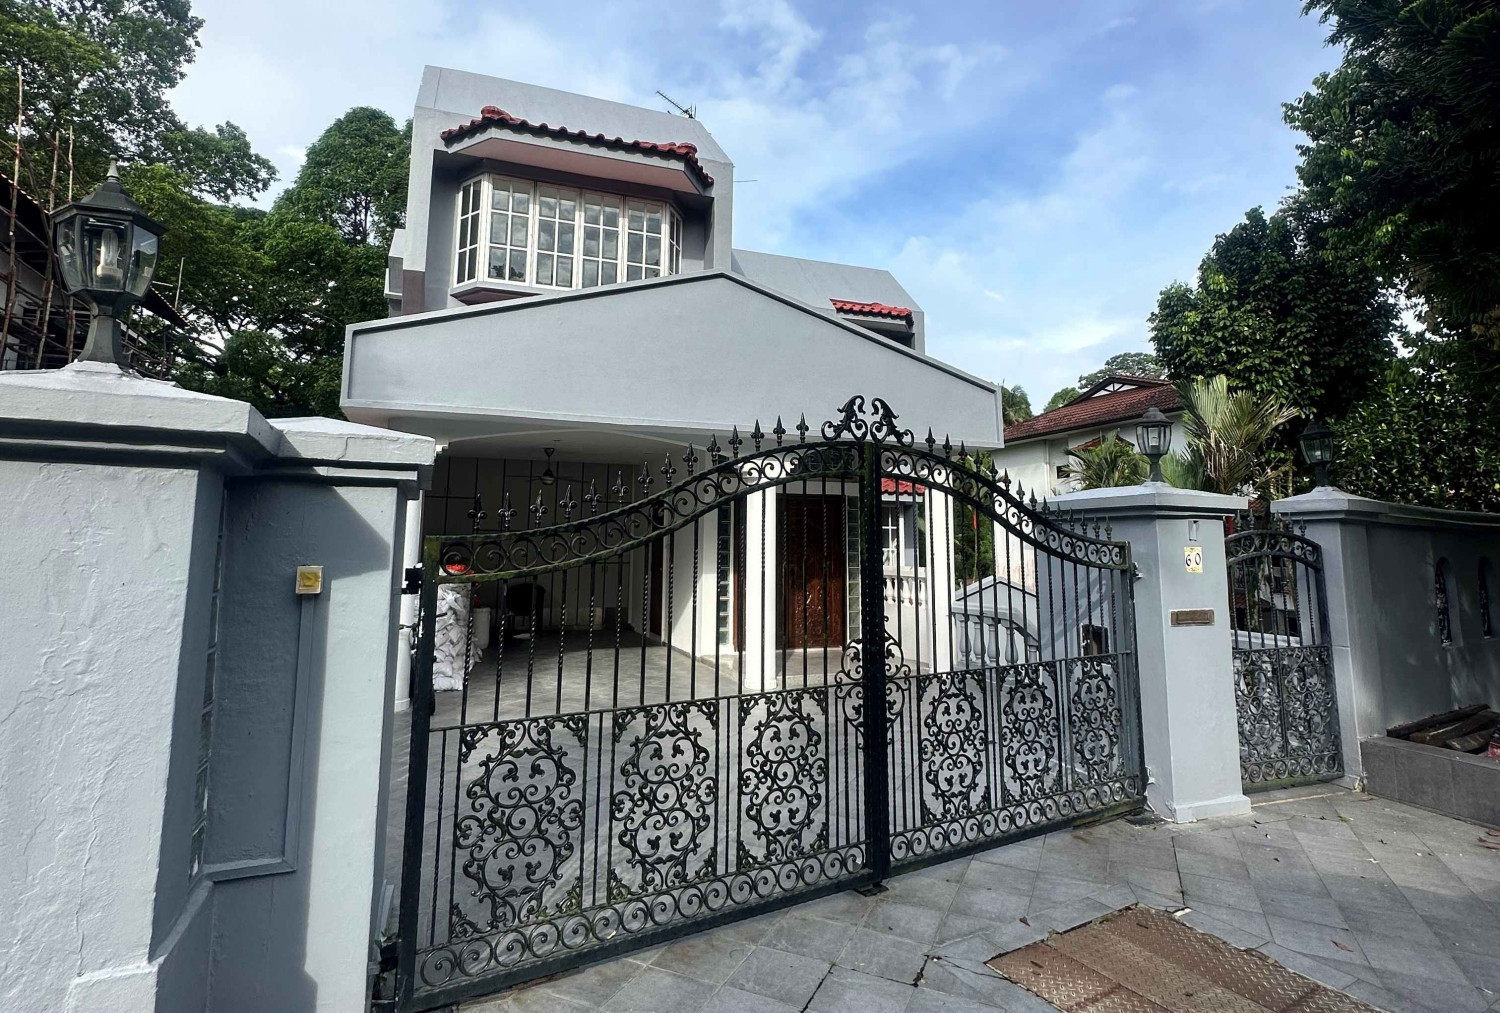 Bungalow on Kheam Hock Road for sale at $16.38 mil - Property News